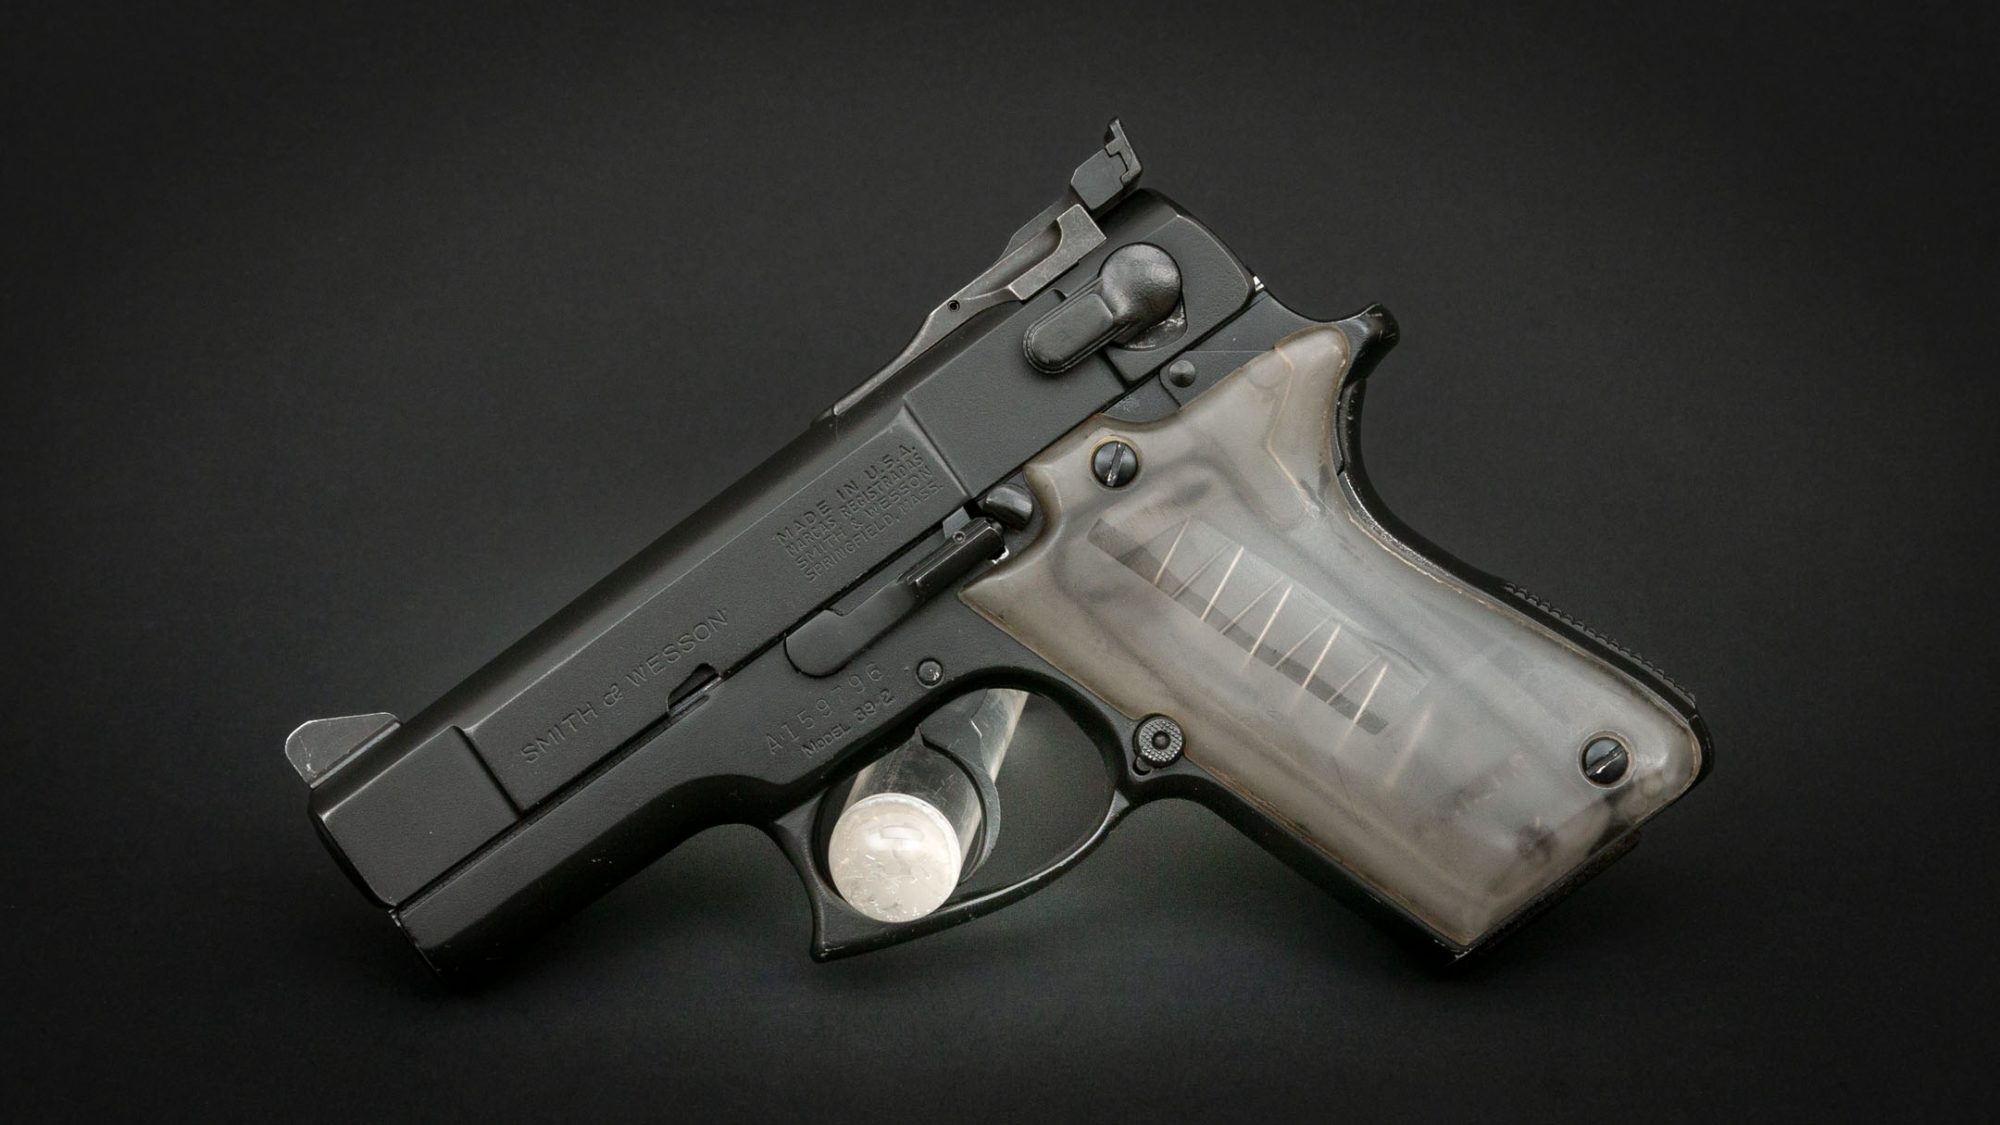 Smith & Wesson 39-2 ASP in 9mm, for sale by Turnbull Restoration Co. of Bloomfield, NY